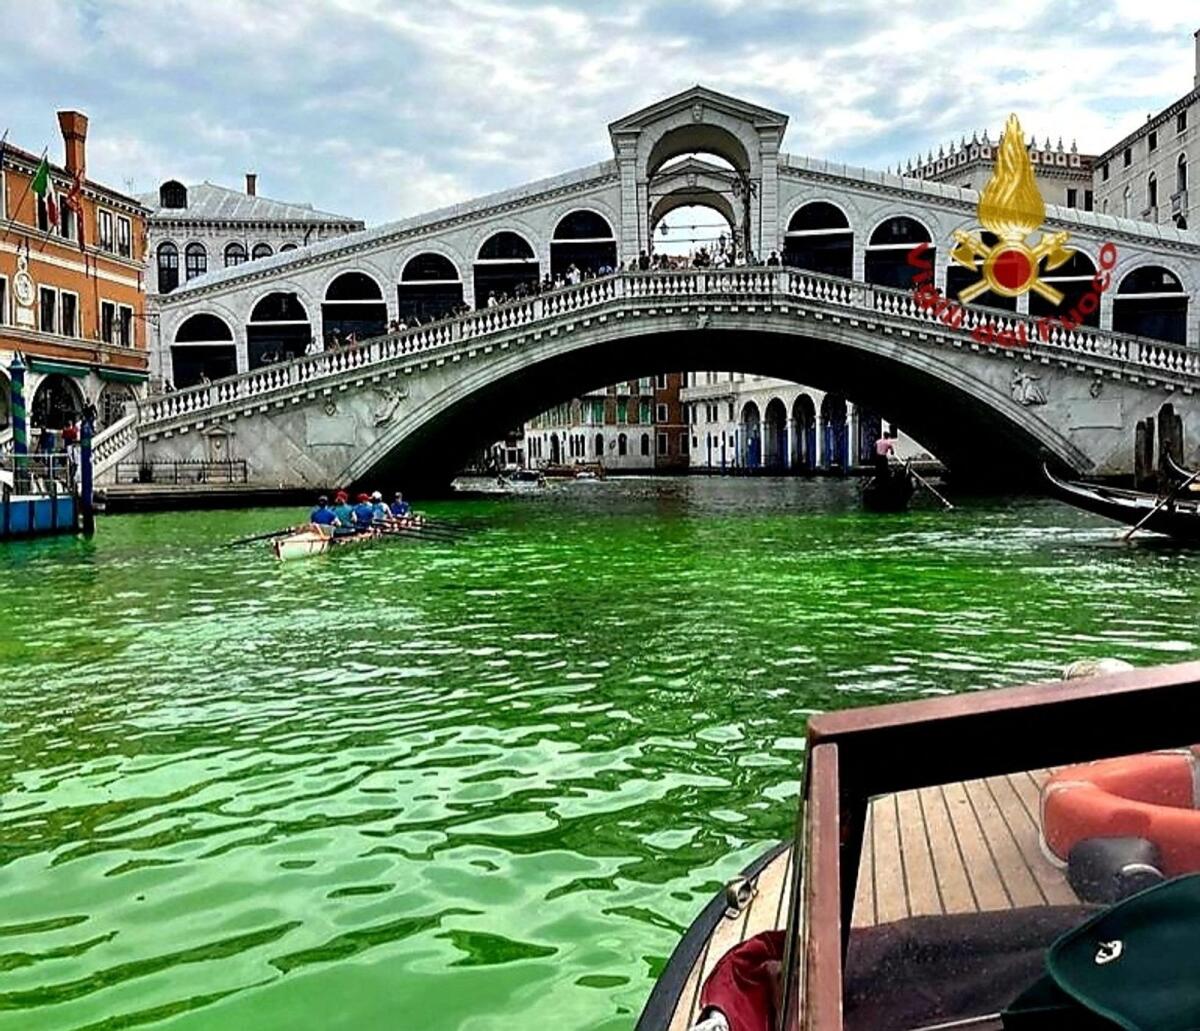 Venice's waters turn green due to an unknown substance near the Rialto Bridge, in Venice, Italy, on Sunday. — Reuters